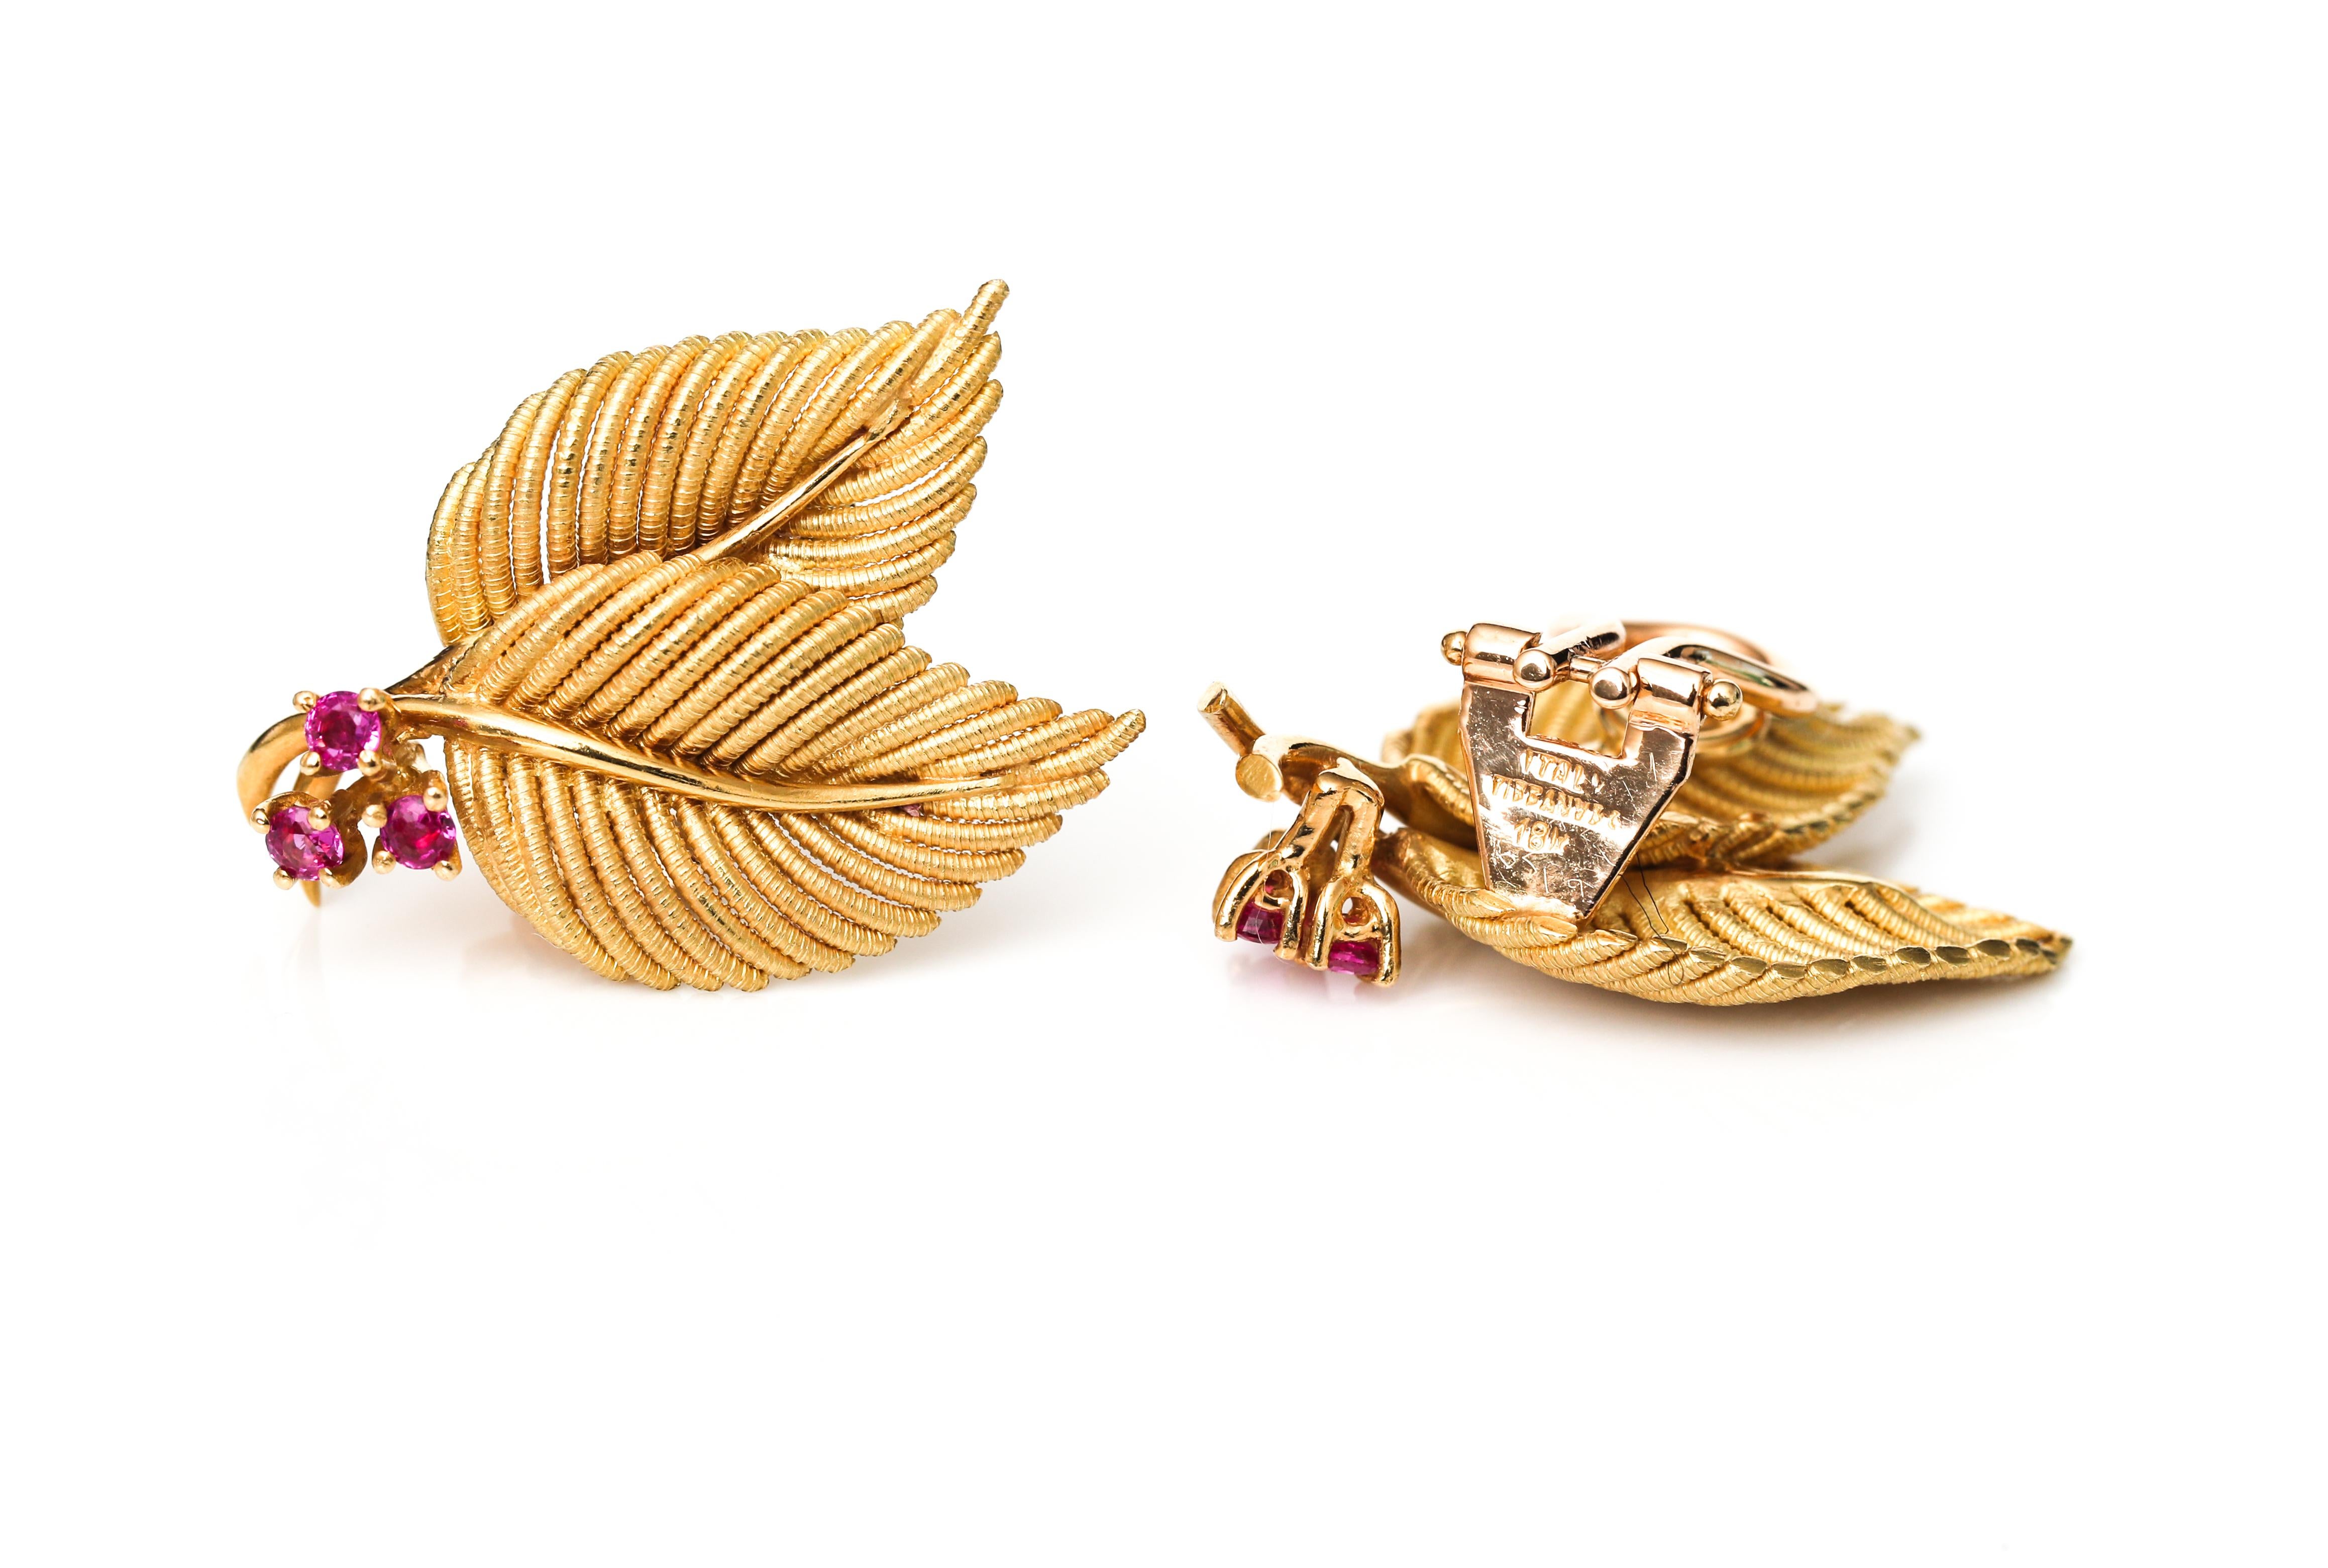 Gorgeous Tiffany & Co 'Leaf Motif' earrings from the 1950s. This beautiful earrings feature two petal leafs, with intricate detailing and accent rubies. The earrings are crafted in 18 karat yellow gold with a combination of high polish and matte